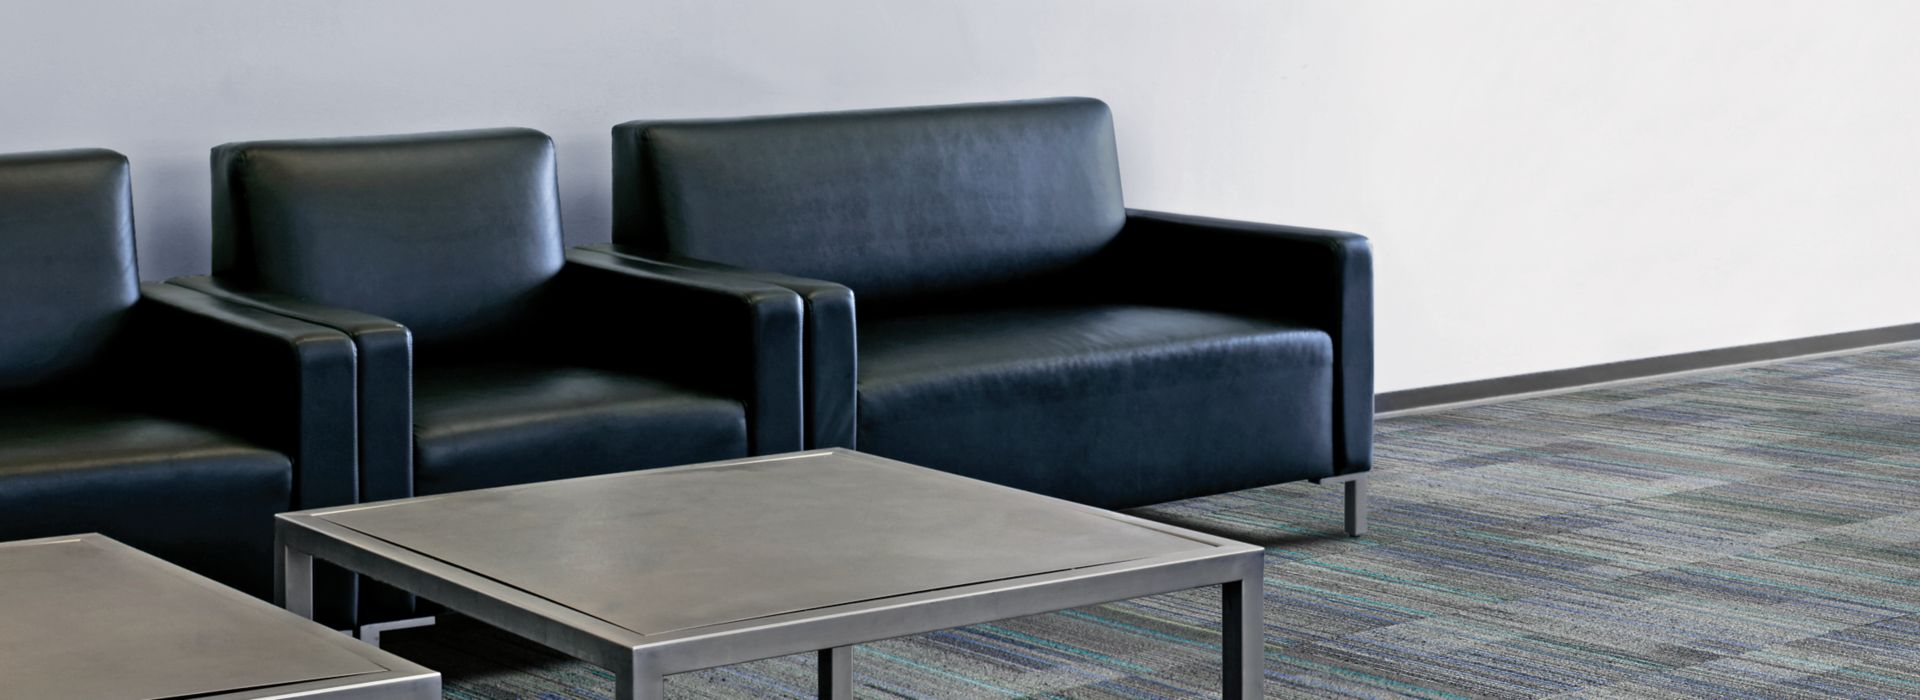 Interface Straight Edge carpet tile in waiting area with table and chairs imagen número 1